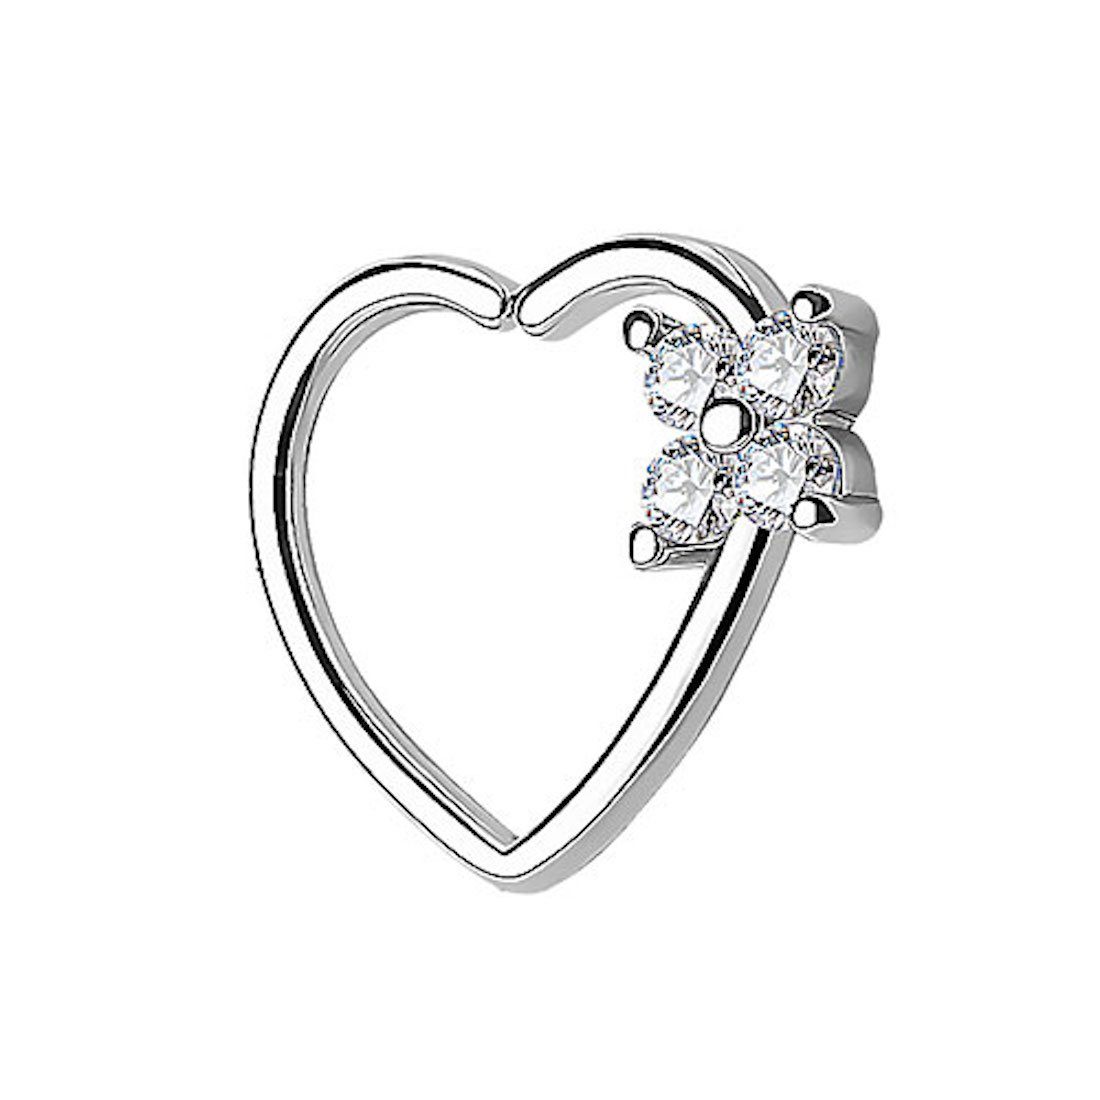 Ring Kristall Strass Piercing - Clear Herz Ring Silber Ohrpiercing Tragus Blume, Piercing-Set Continuous Helix Cartilage Kleeblatt Taffstyle Ohr Knorpel